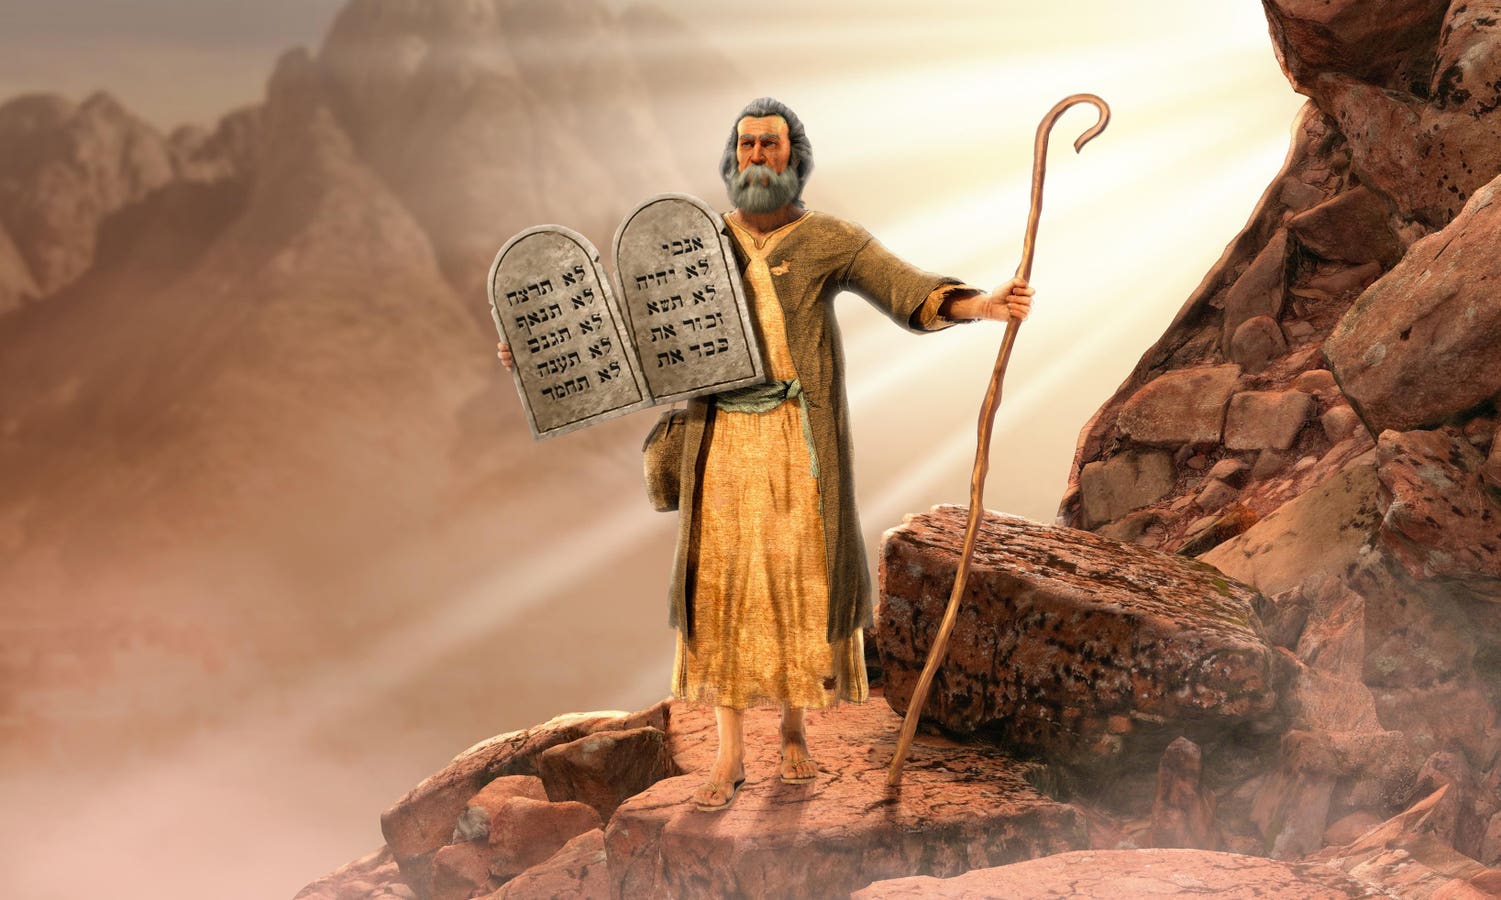 Louisiana Just Put The Ten Commandments In Every Classroom. Here’s The Other Danger With That Law